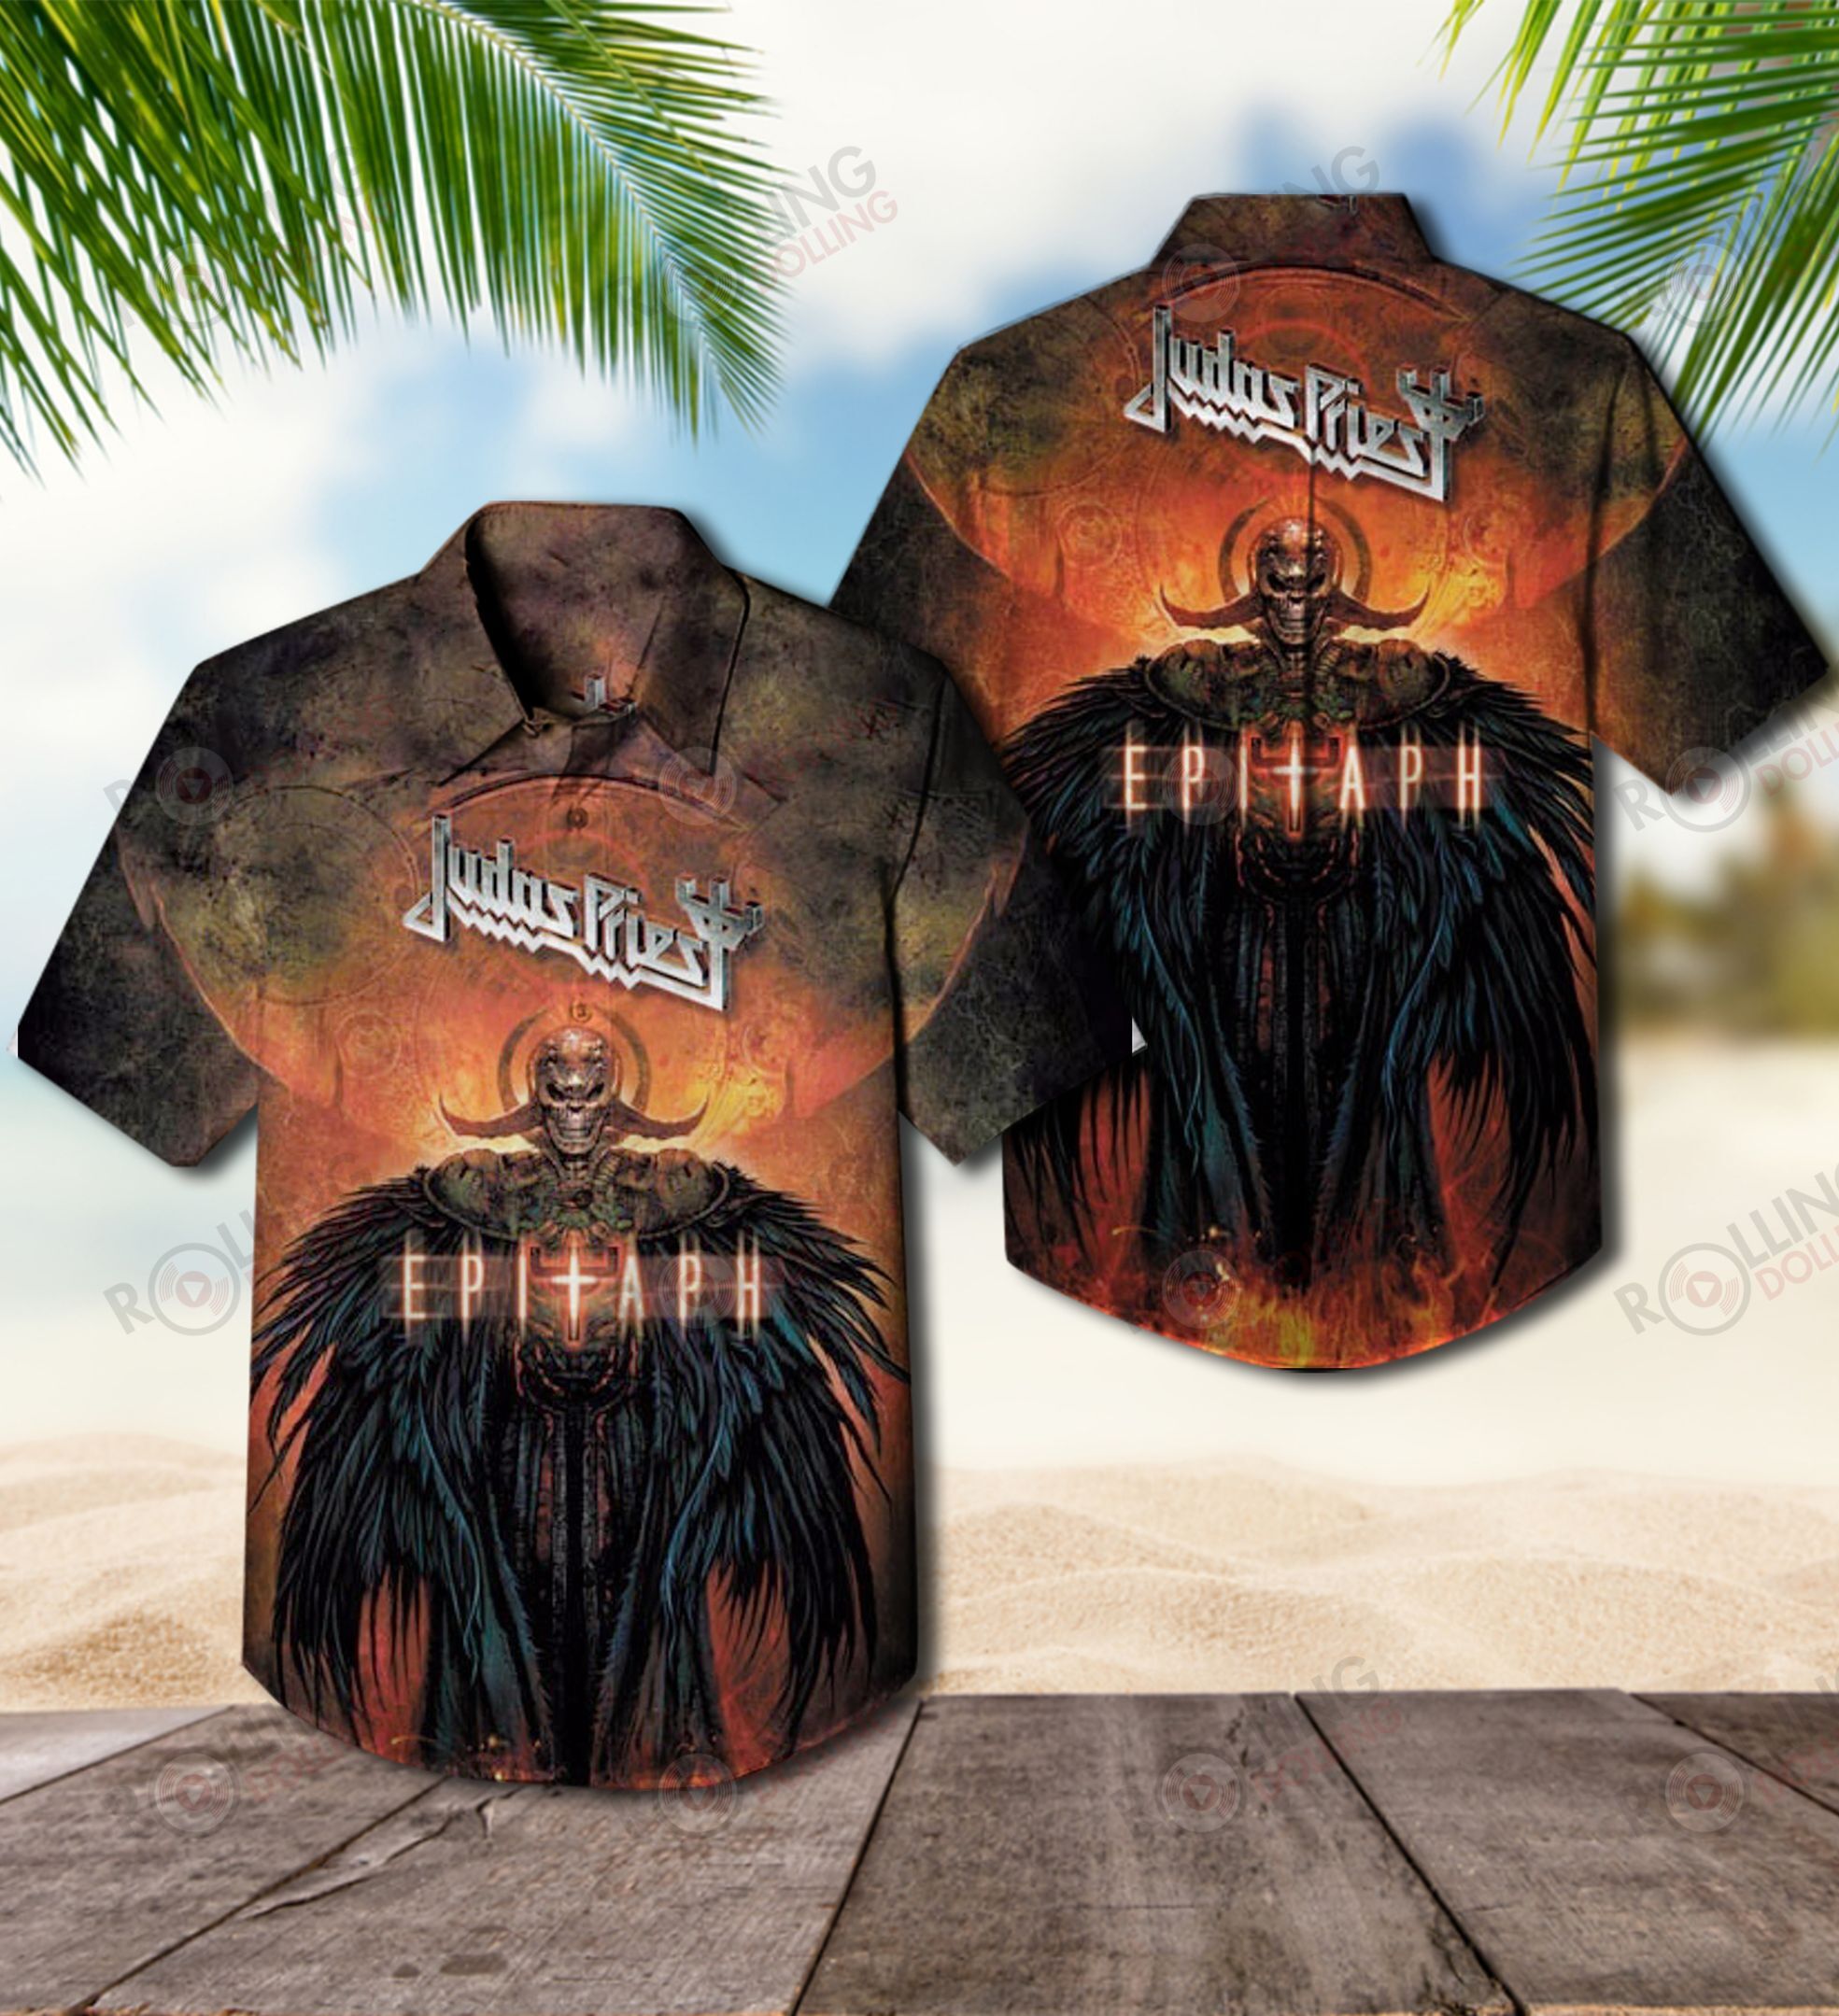 For summer, consider wearing This Amazing Hawaiian Shirt shirt in our store 90